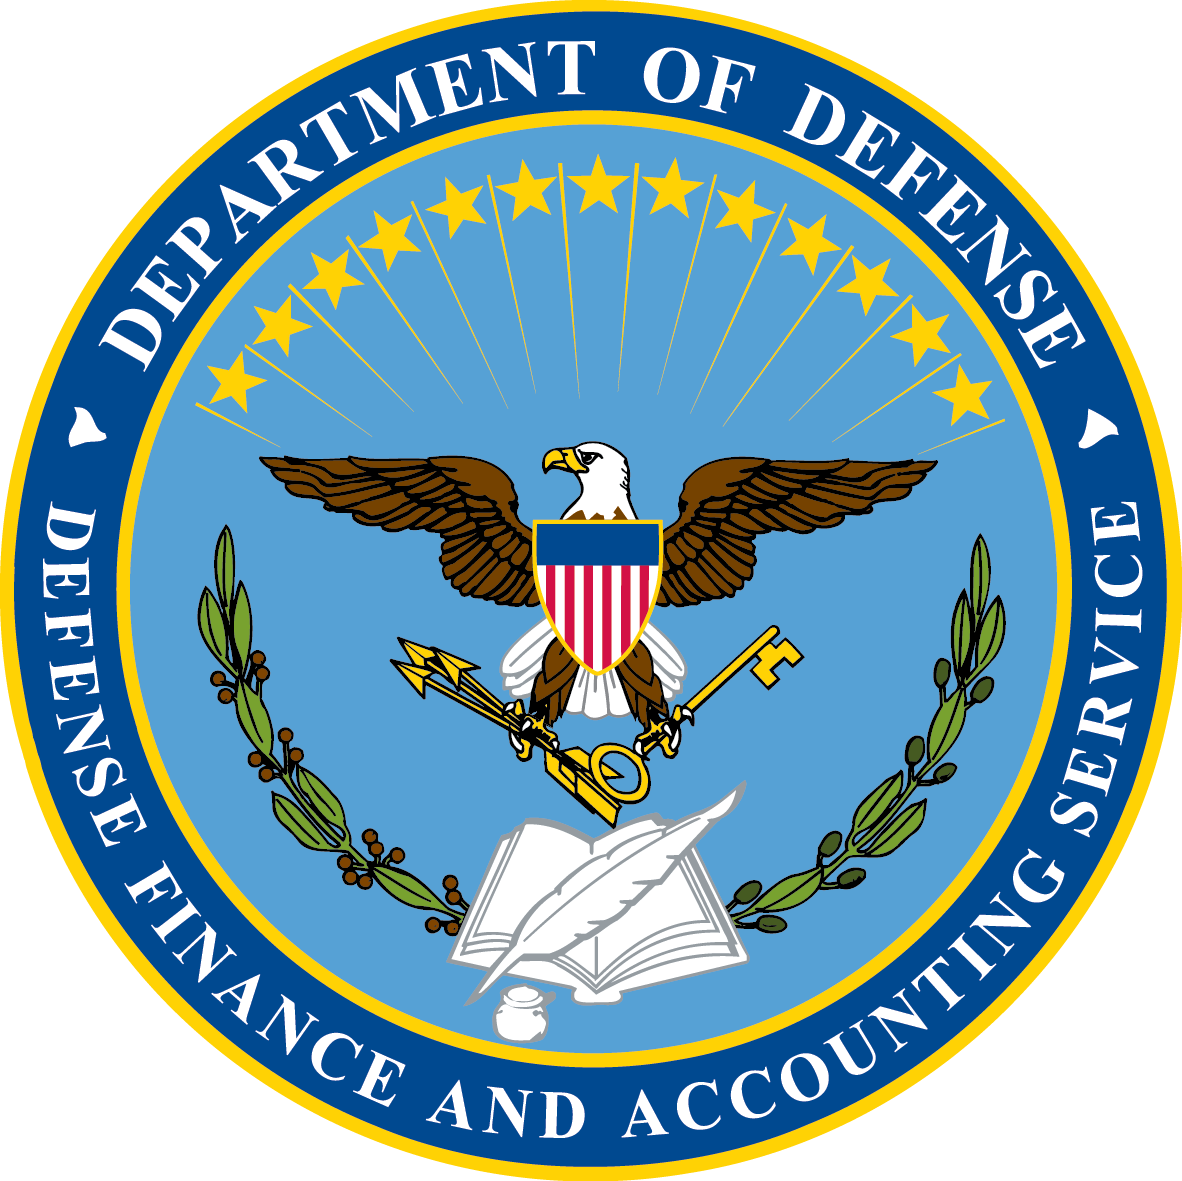 "the Various Components Of The Dfas Seal Reflect The - United States Department Of Defense (1182x1181)